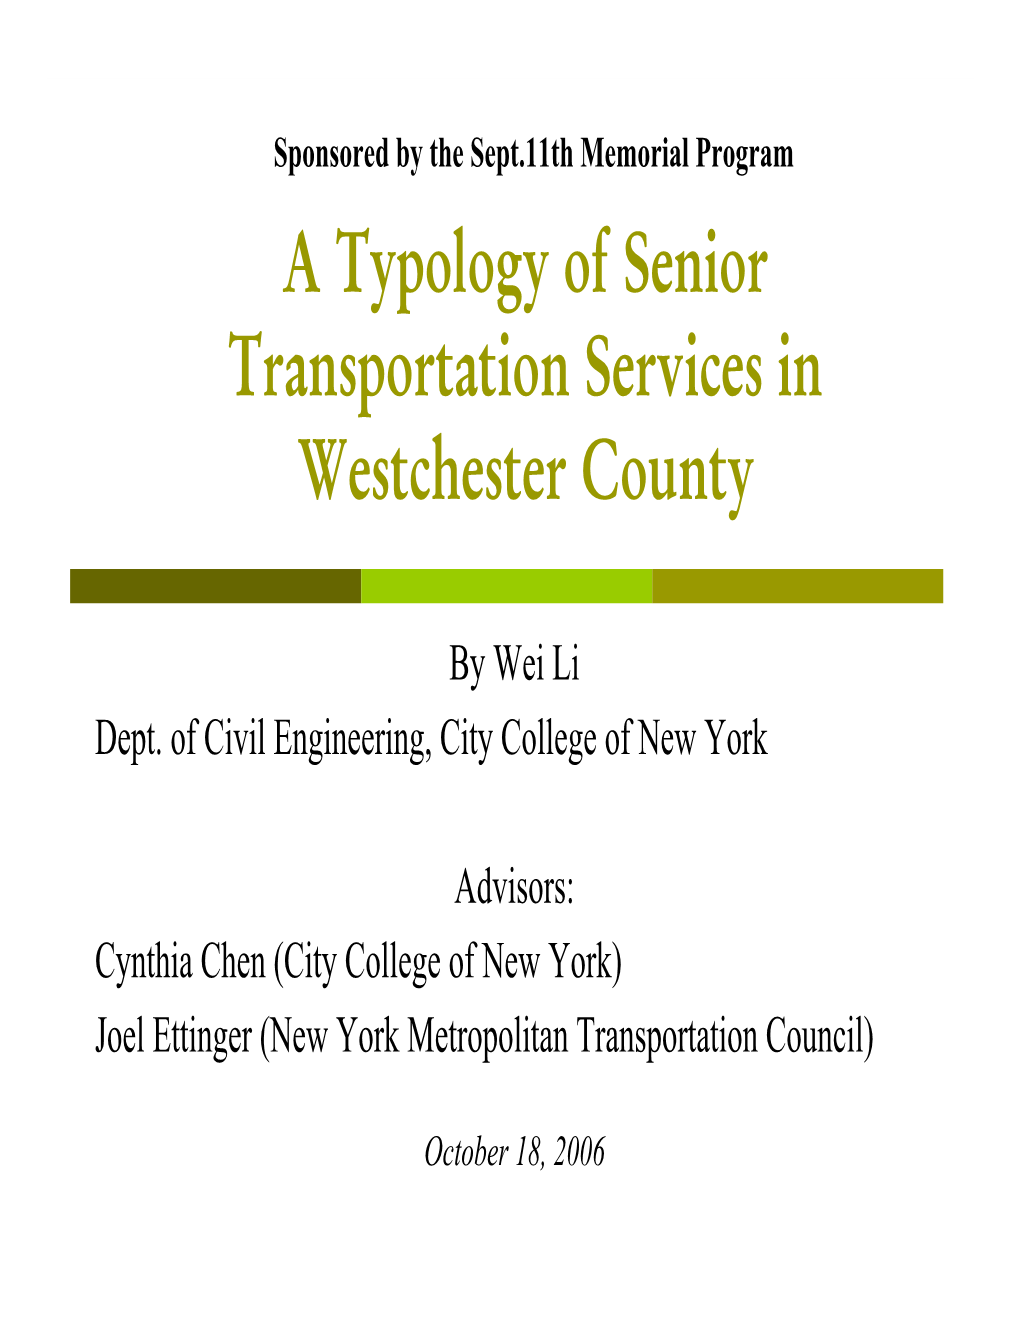 A Typology of Senior Transportation Services in Westchester County